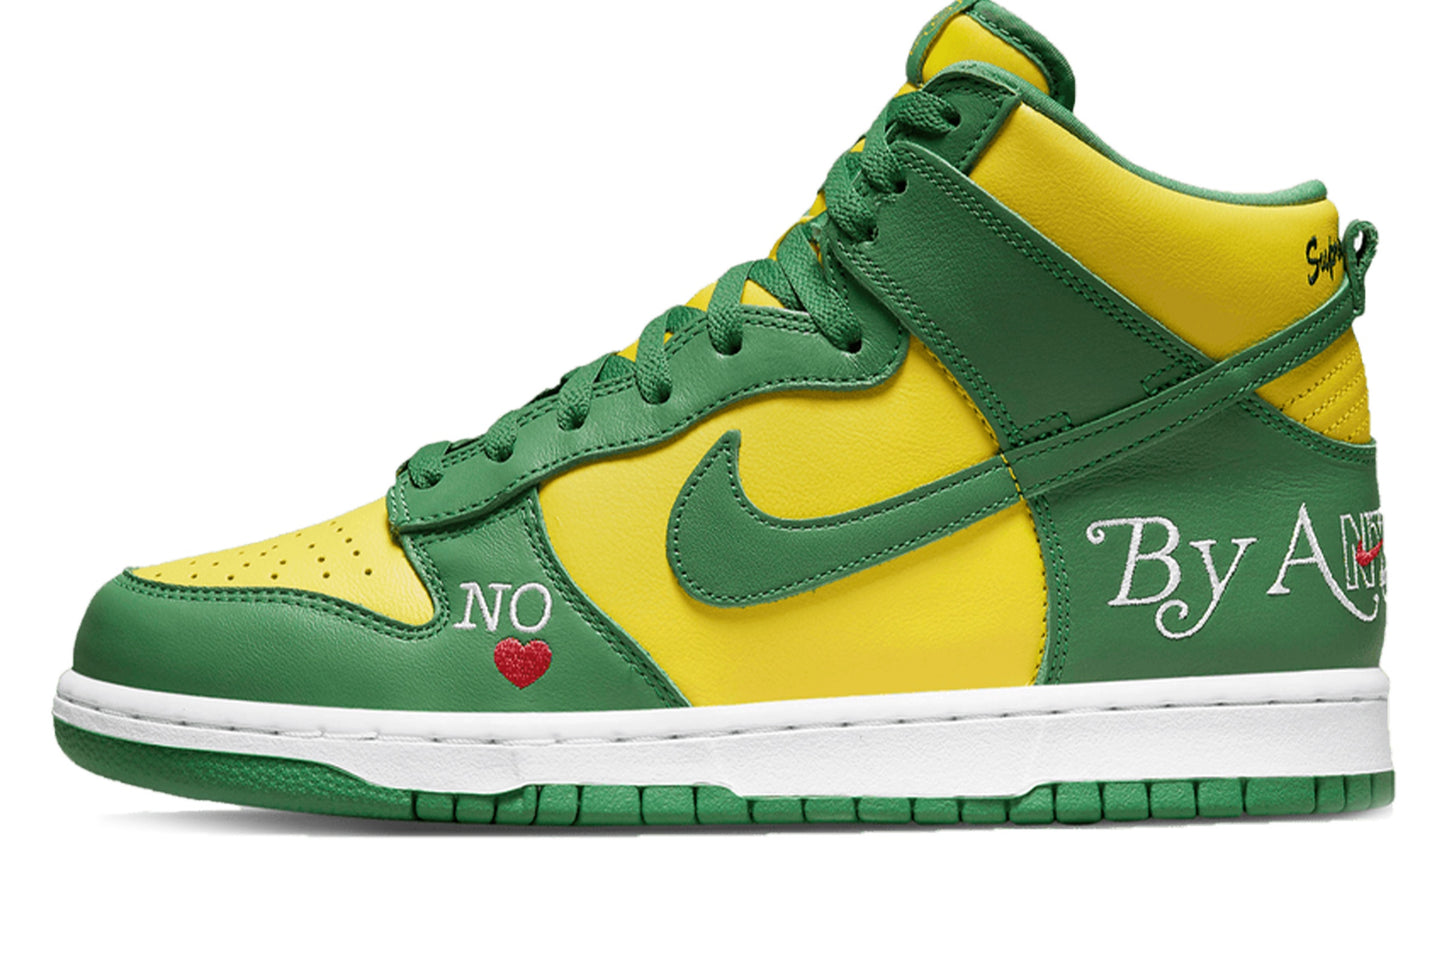 Supreme x Nike Dunk High SB By Any Means - Brazil